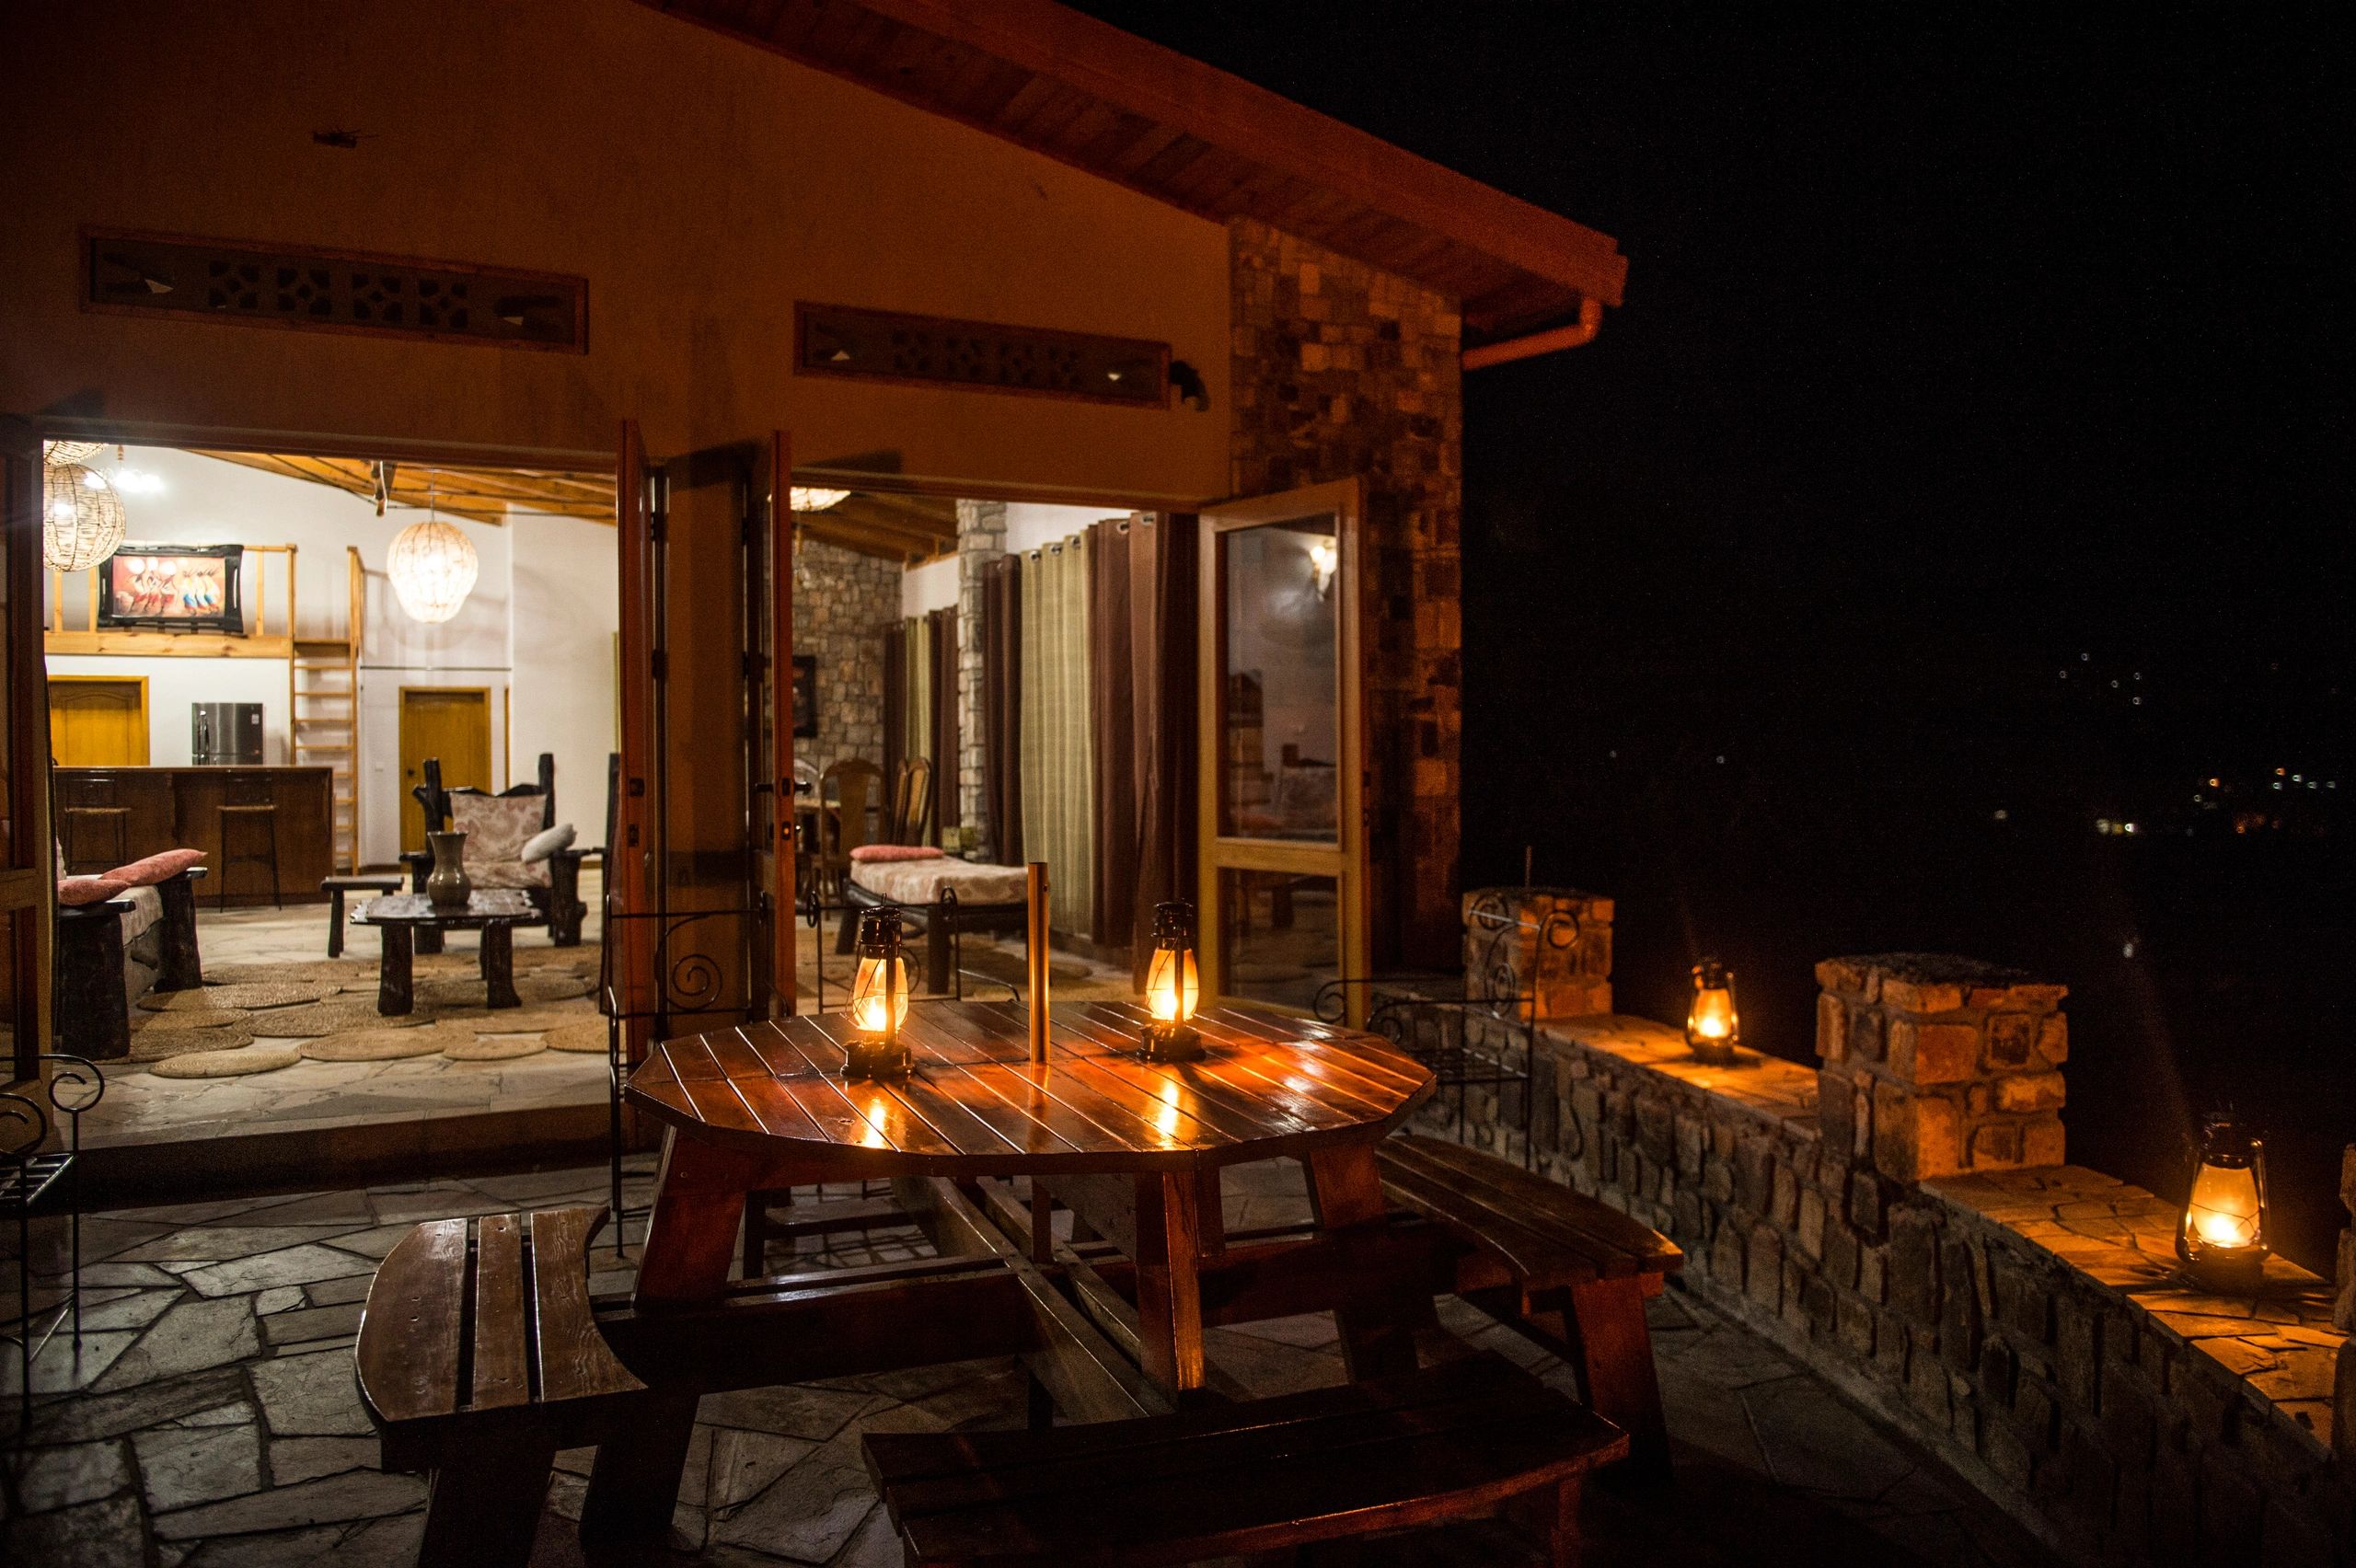 Private evening vacation rental in Kibuye.